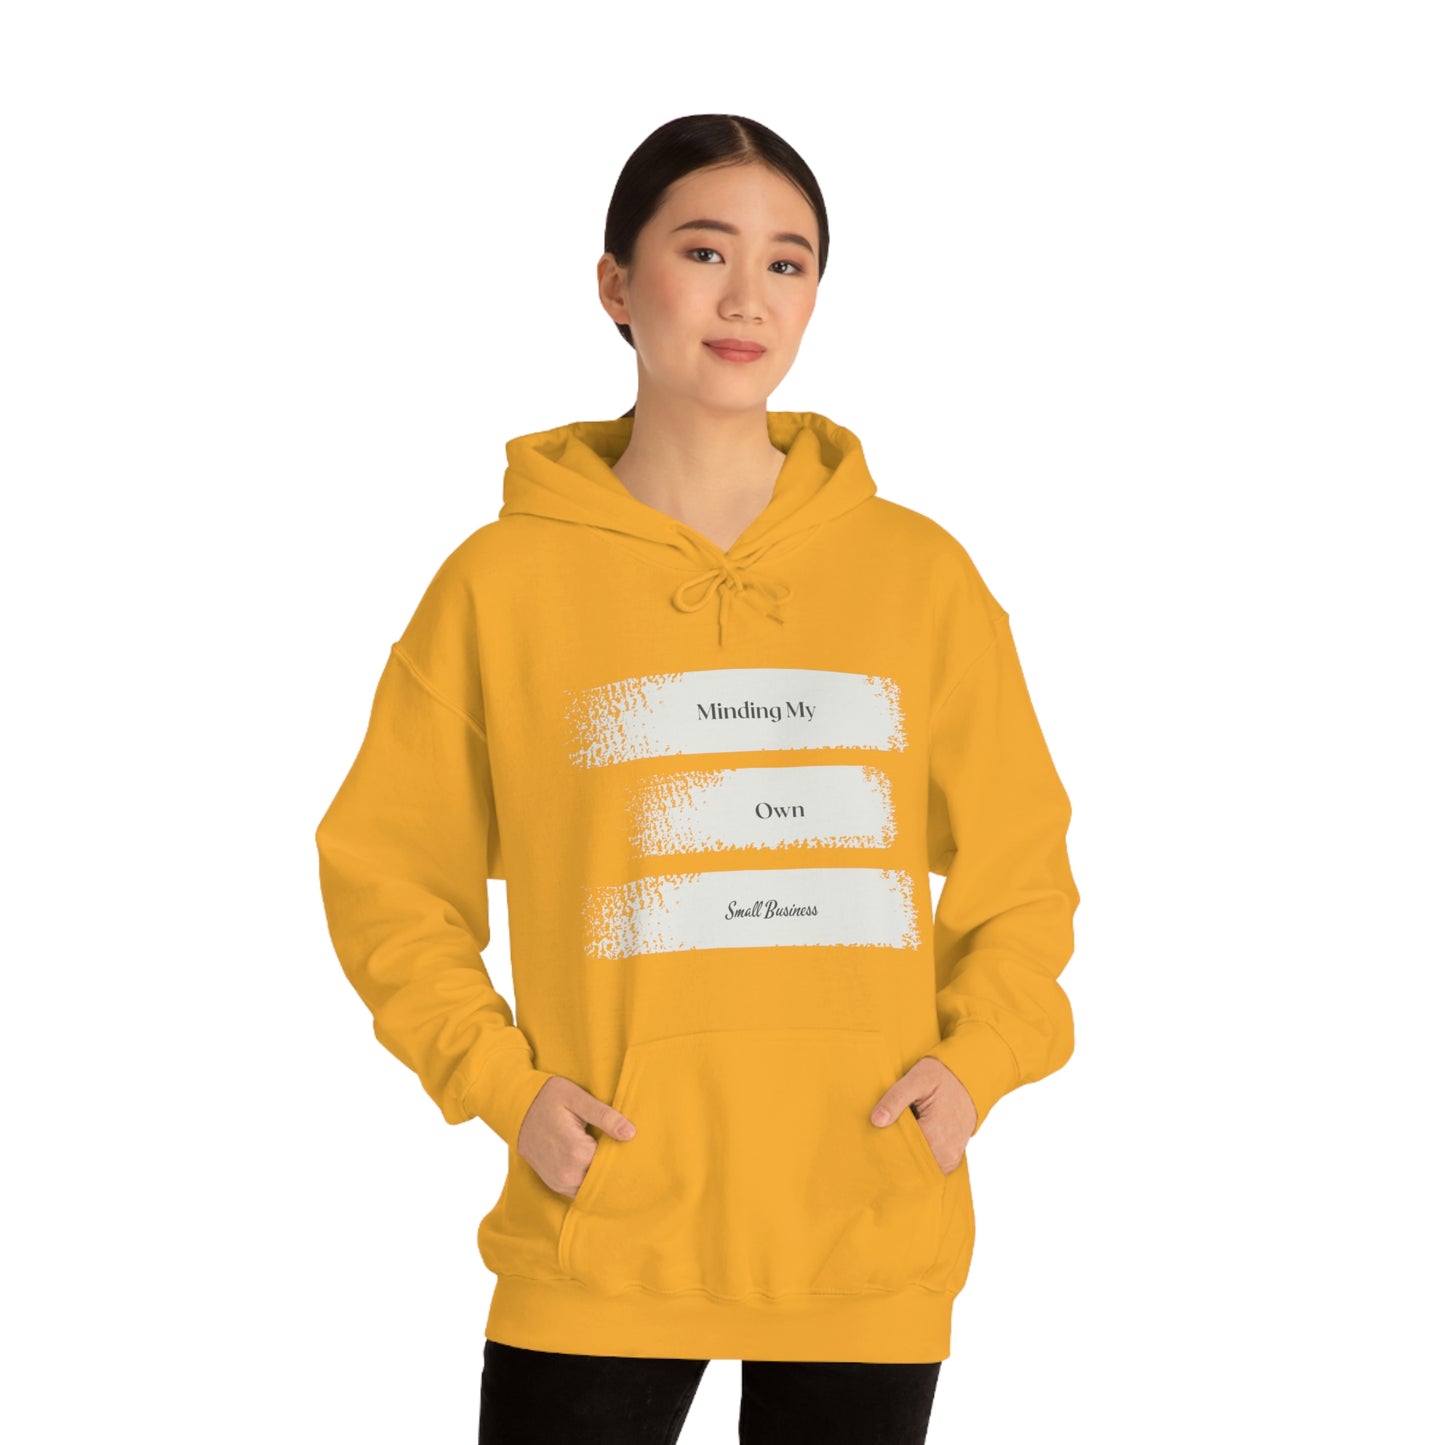 Minding My Own Small Business Hooded Sweatshirt